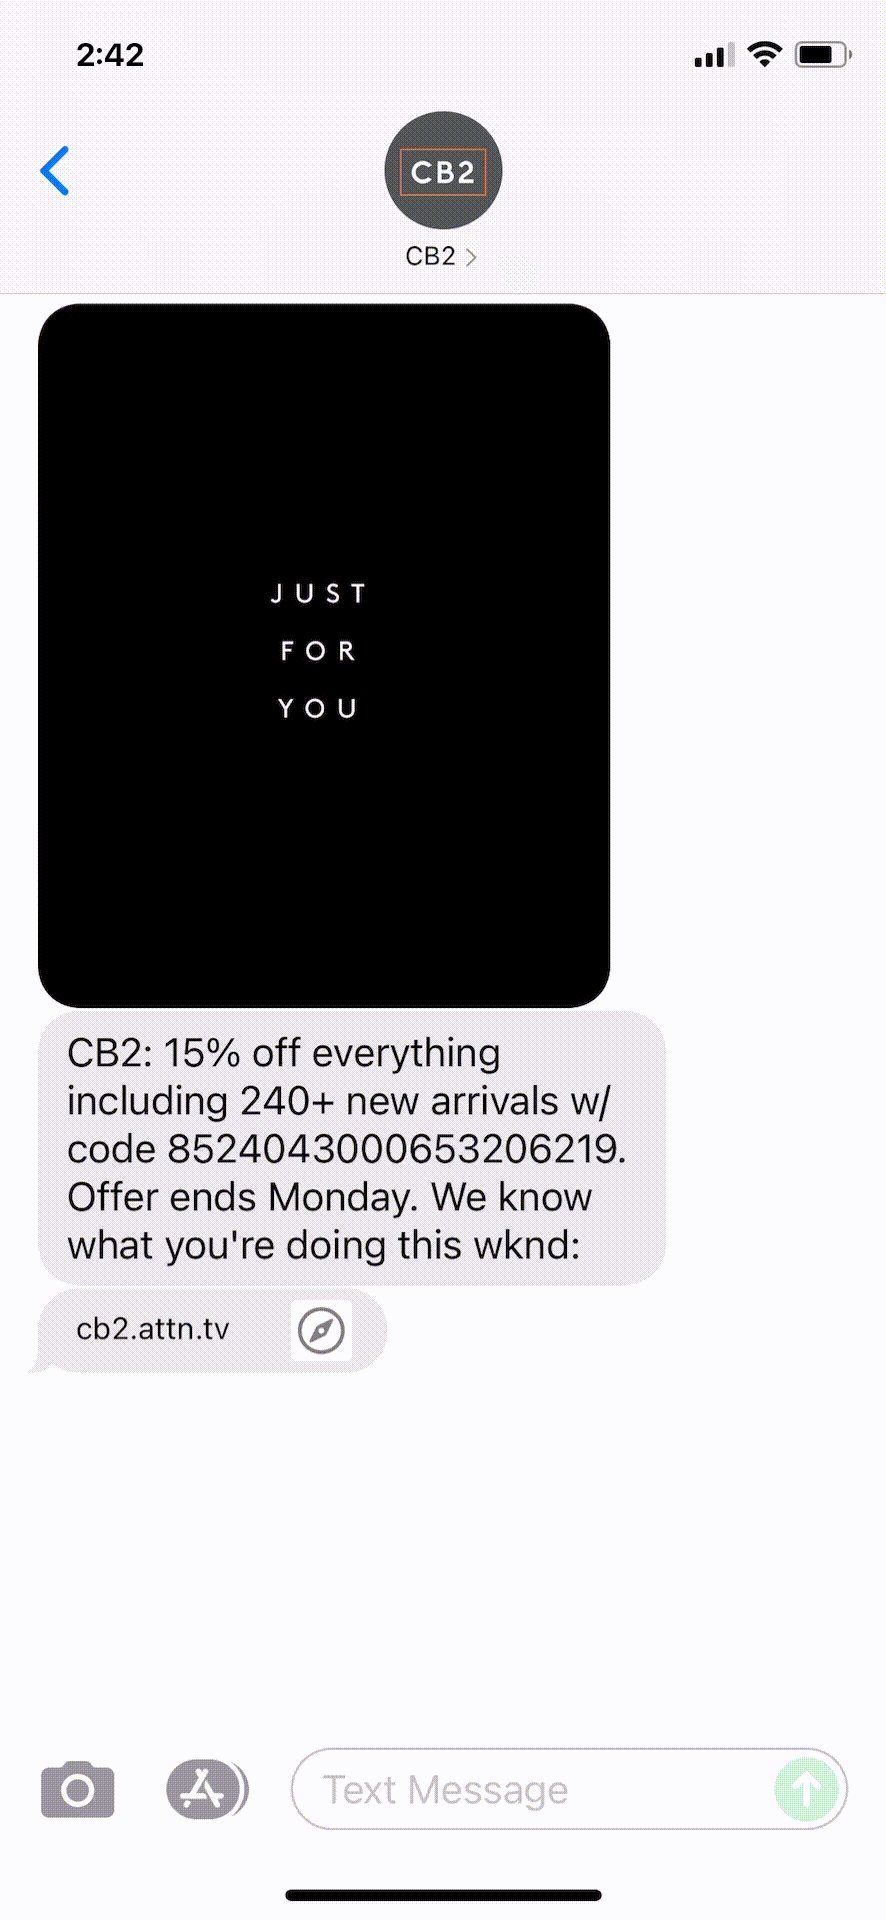 CB2-Text-Message-Marketing-Example-10.29.2021